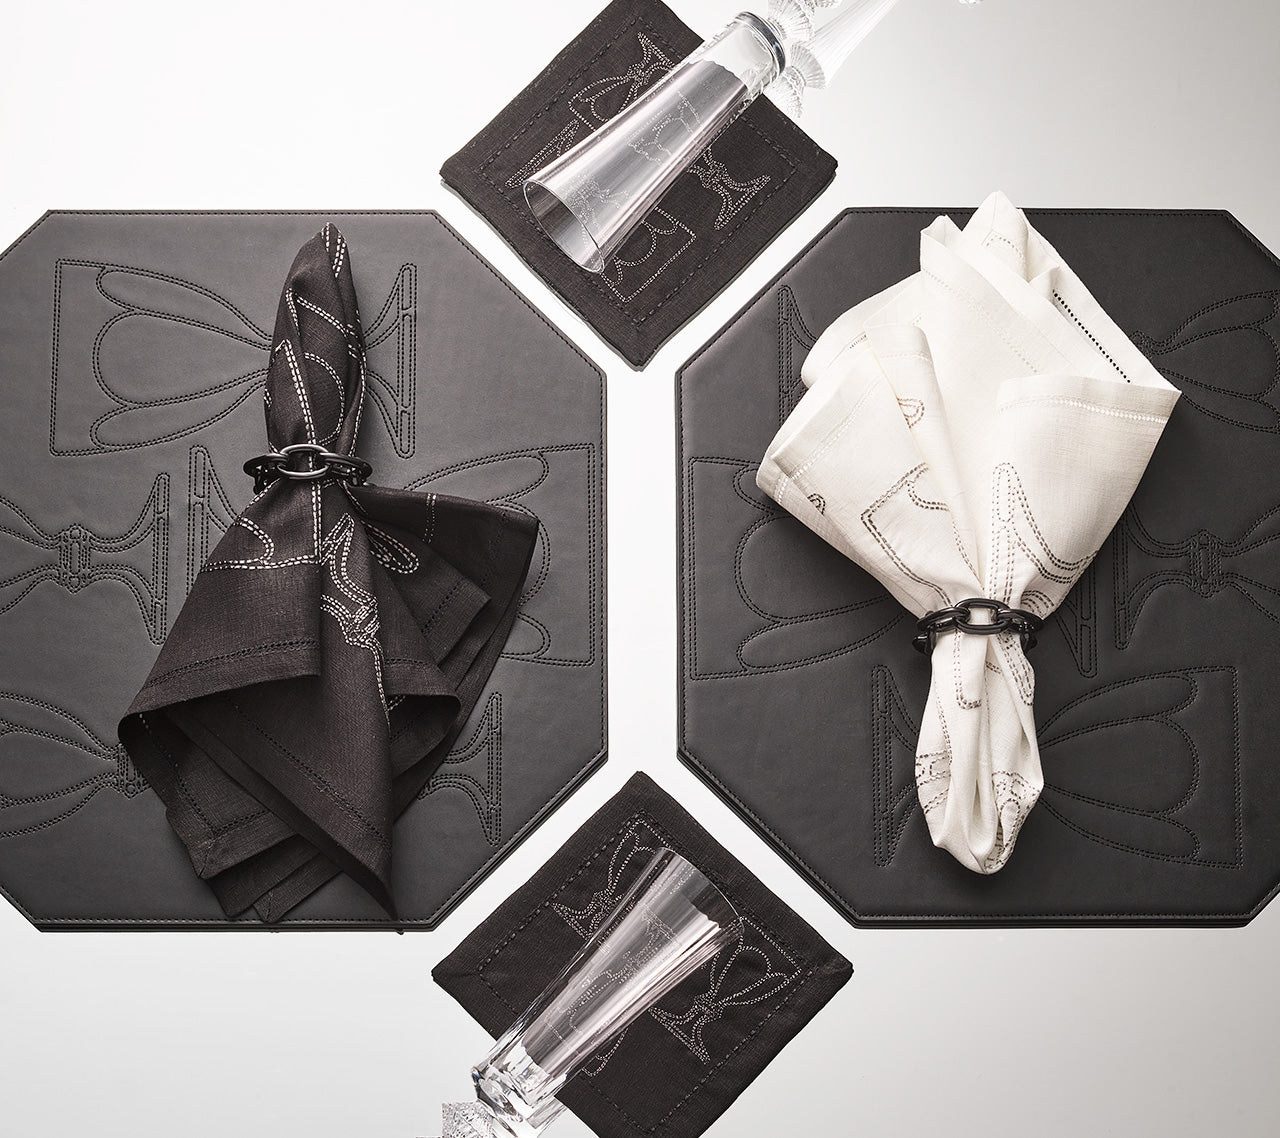 Harcourt Cocktail Napkin in Black & Gunmetal, Set of 6 in a Gift Box